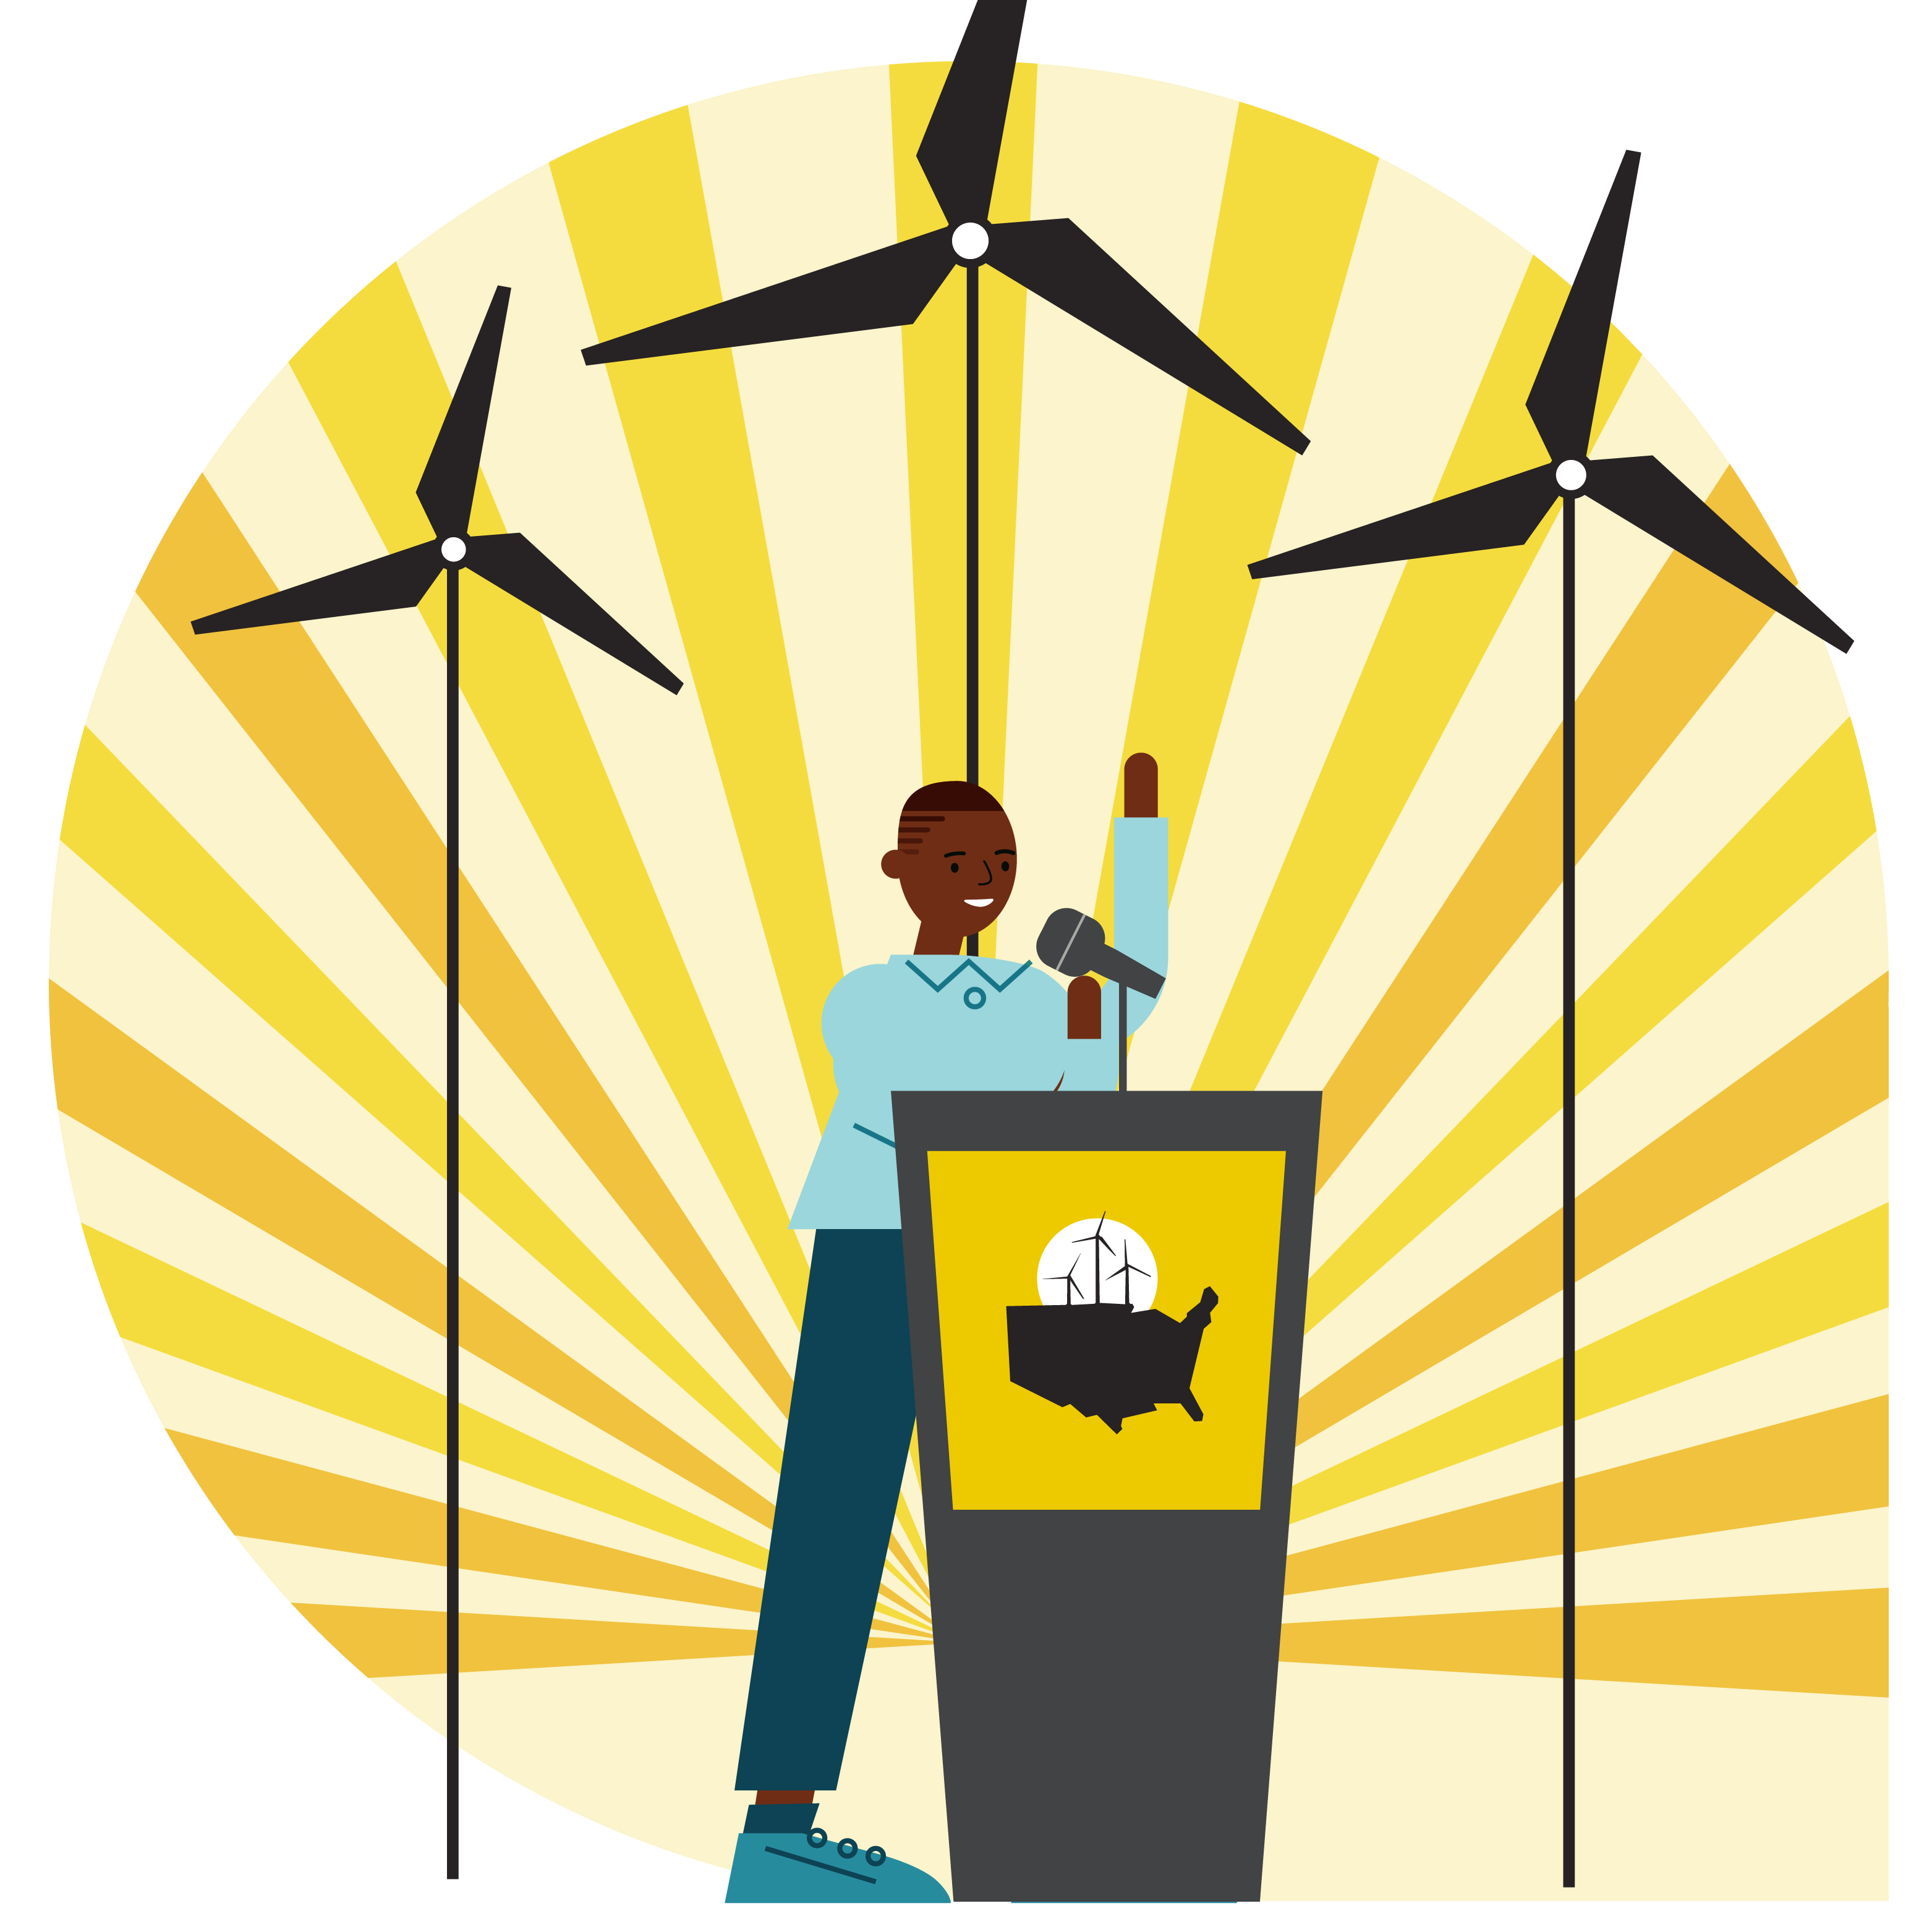 Illustrated figure standing at podium in front of wind turbines